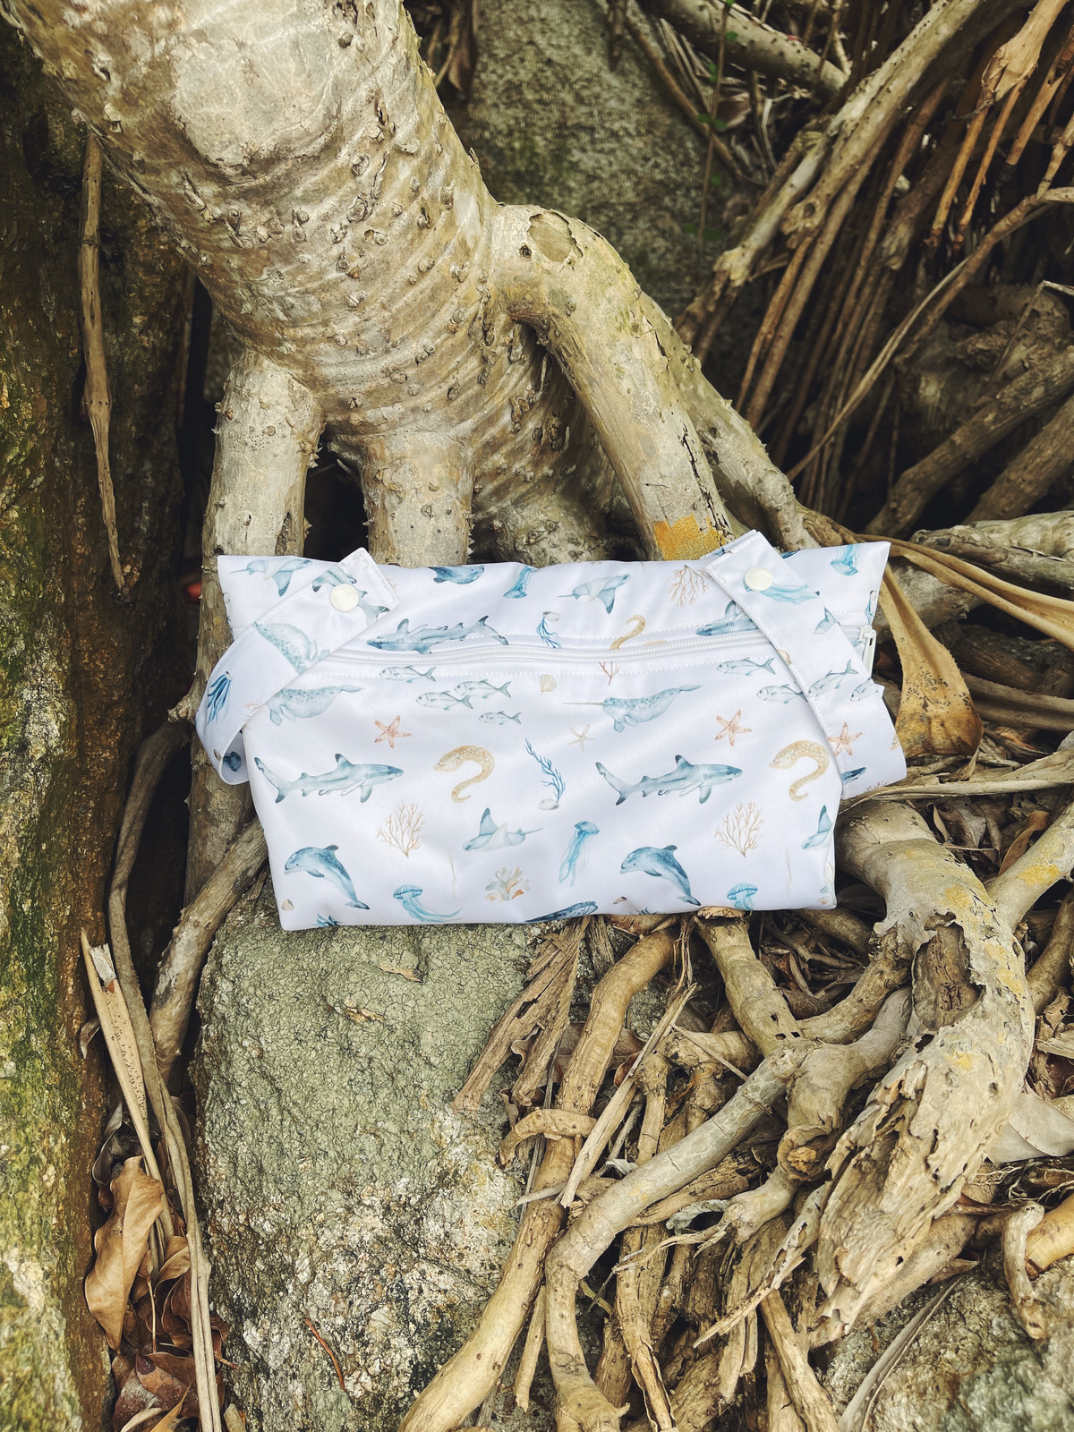 This Little Essentials double-lined, waterproof pouch is perfect for keeping your diaper bag or mommy/daddy bag organized! It’s the perfect size for all your little one’s little essentials that you need to access easily, whether it’s on a walk to the park, long-haul travel or cot-side and by your changing station.